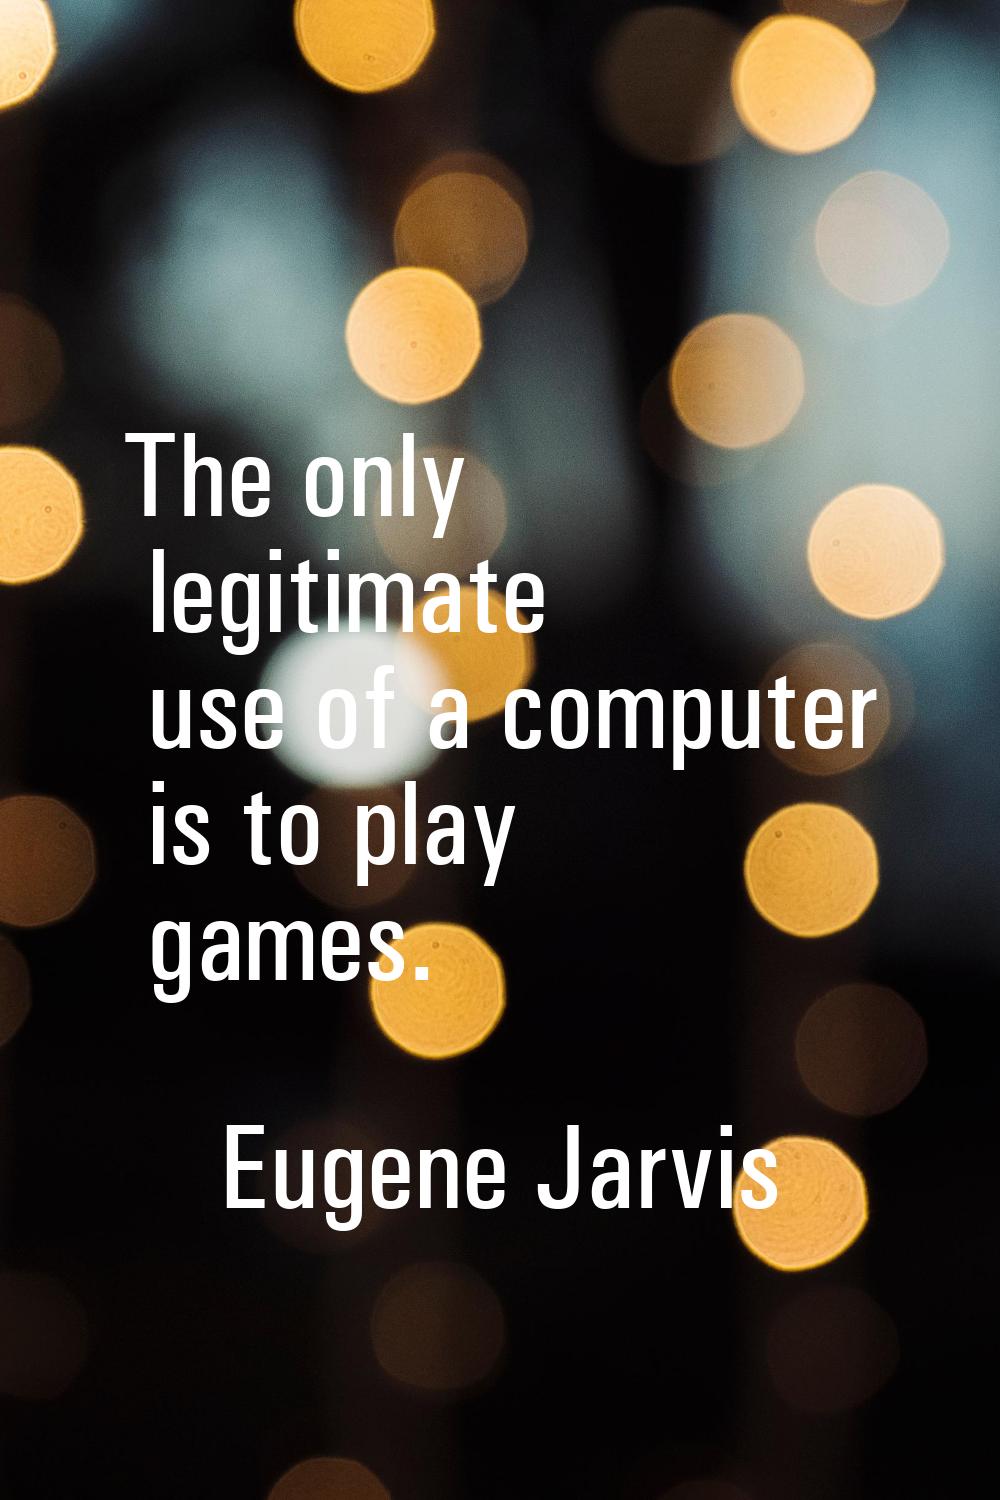 The only legitimate use of a computer is to play games.